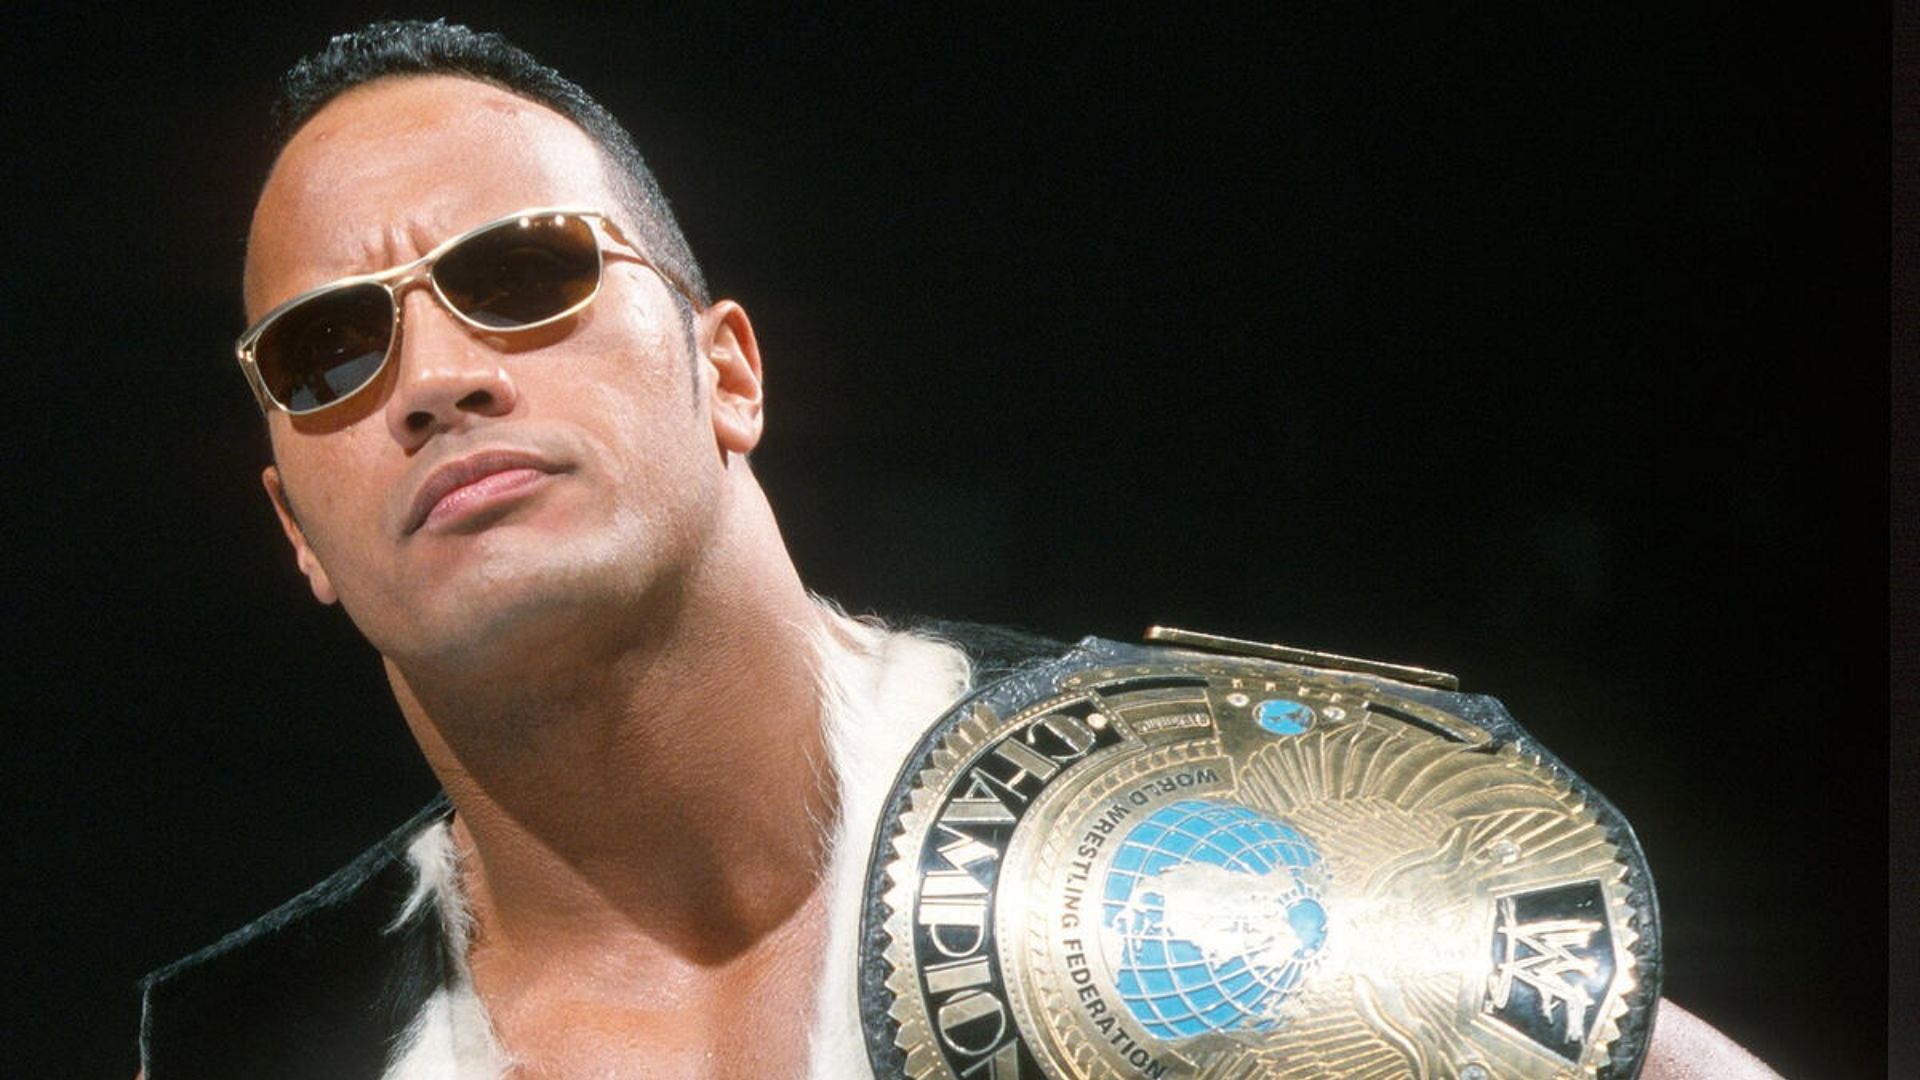 The Rock made his WWE debut in 1996